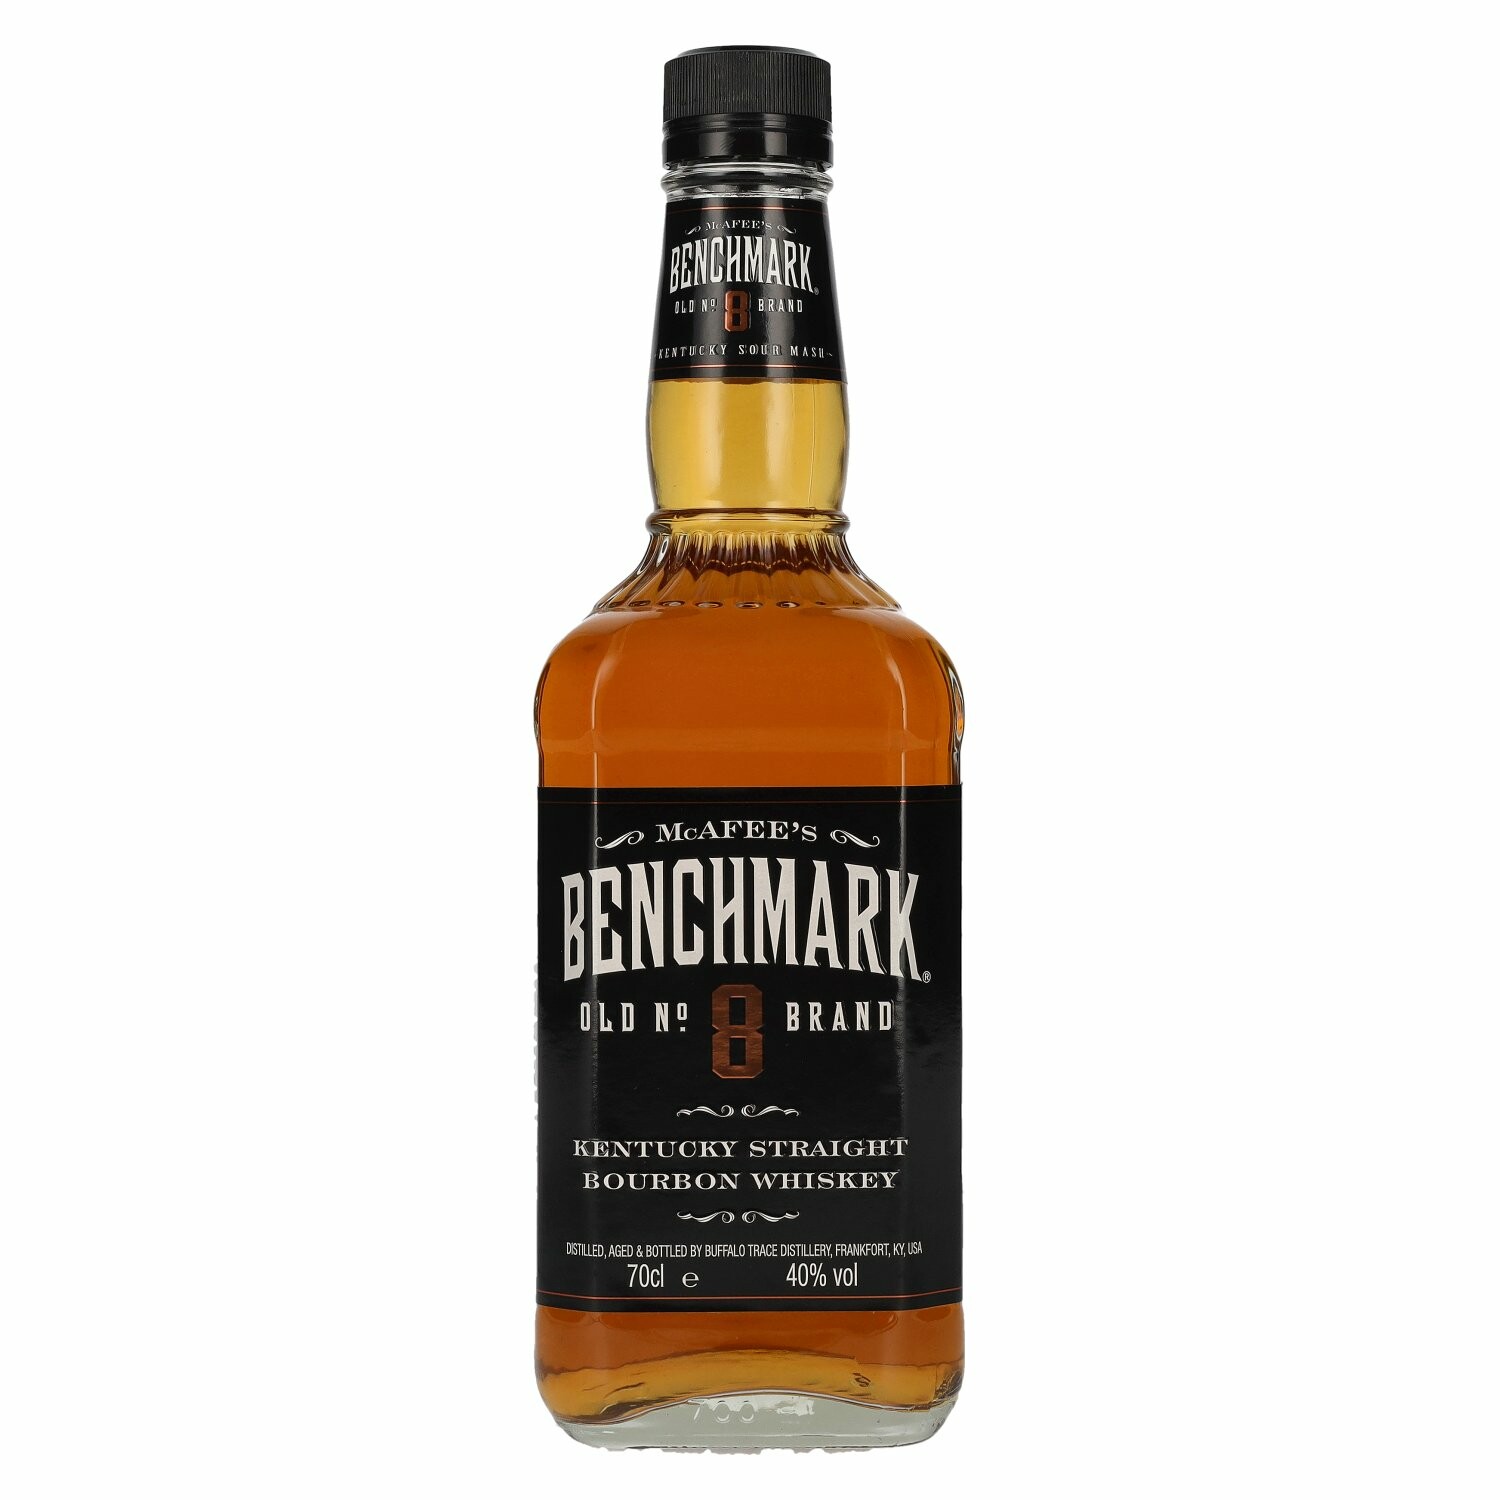 McAFEE'S Benchmark Old No. 8 Brand Kentucky Straight Bourbon Whiskey 40% Vol. 0,7l